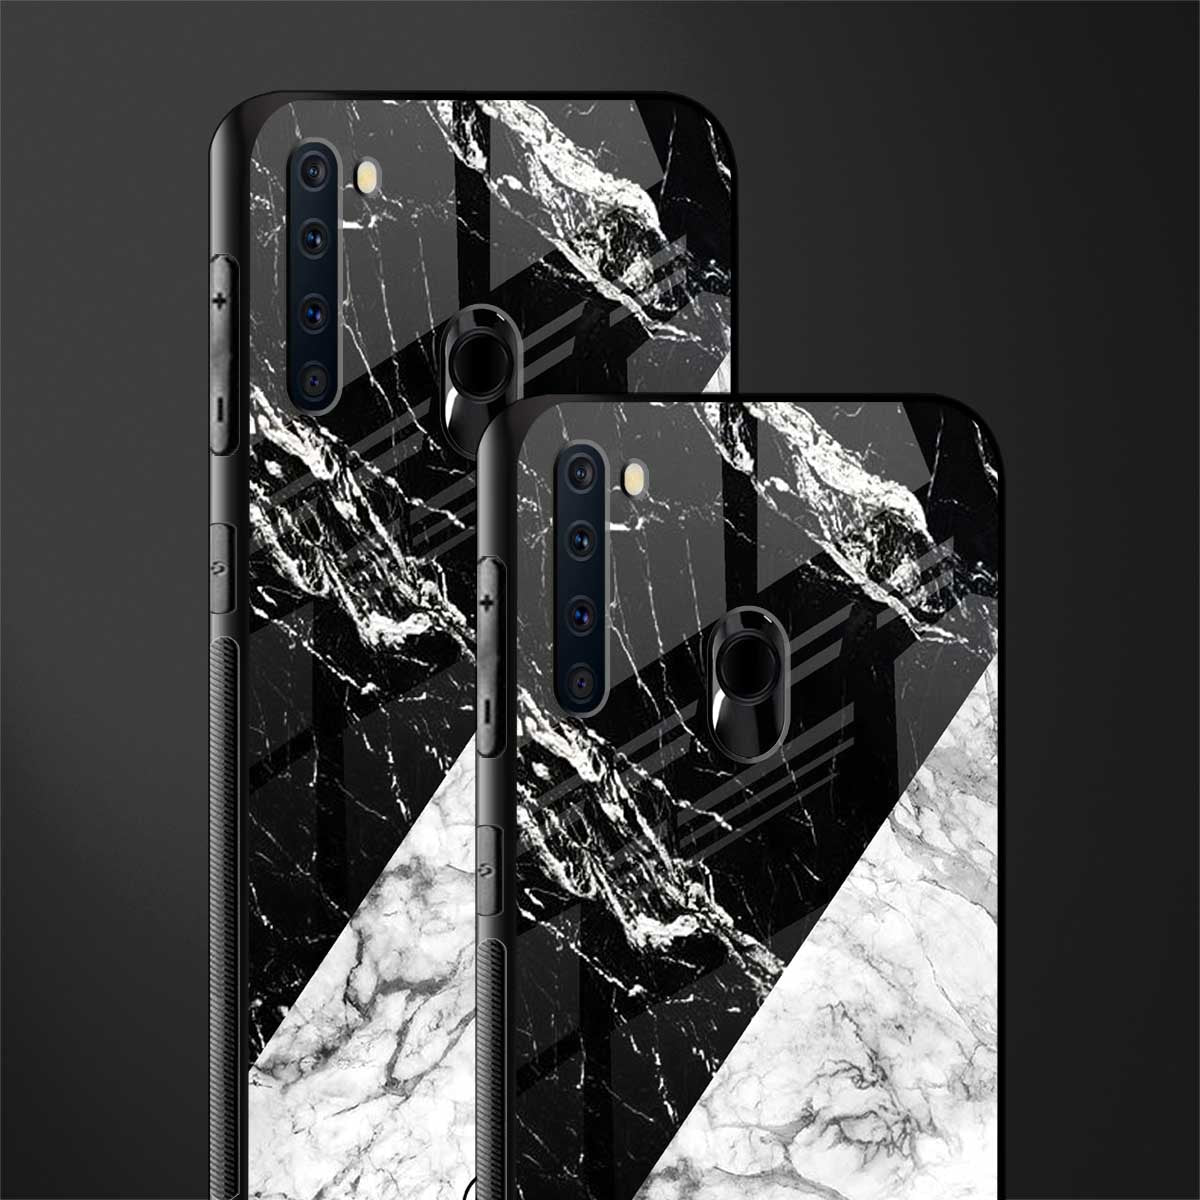 fatal contradiction phone cover for samsung a21